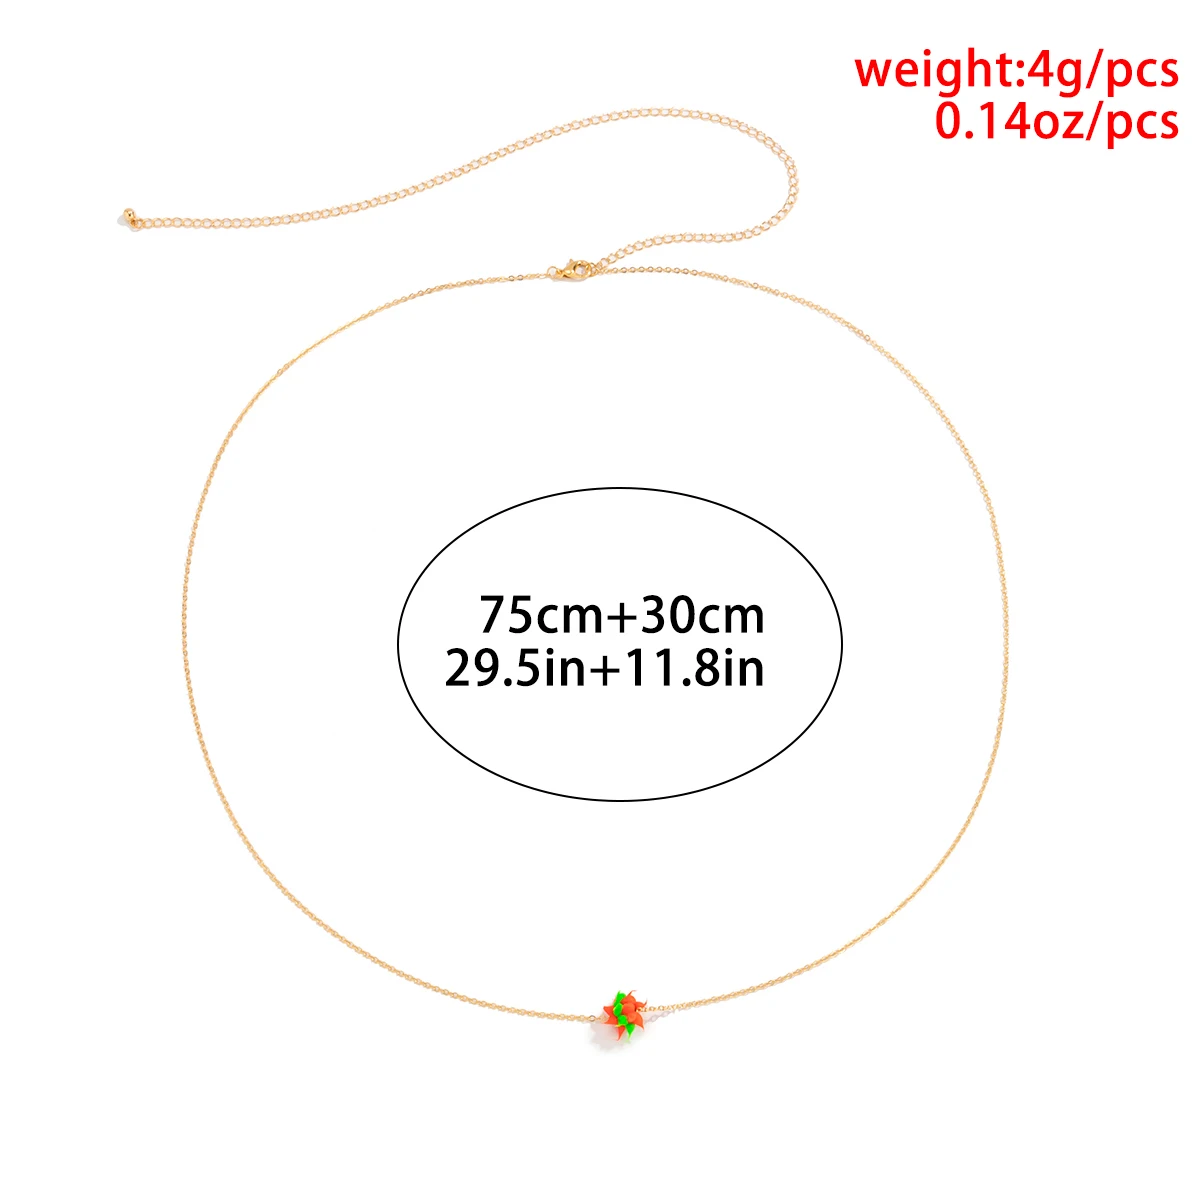 
SHIXIN New Arrival Red Green Soft Pottery Beaded Waist Chain Cute Soft Clay Link Belly Chain Handmade Body Jewelry Chain Women 